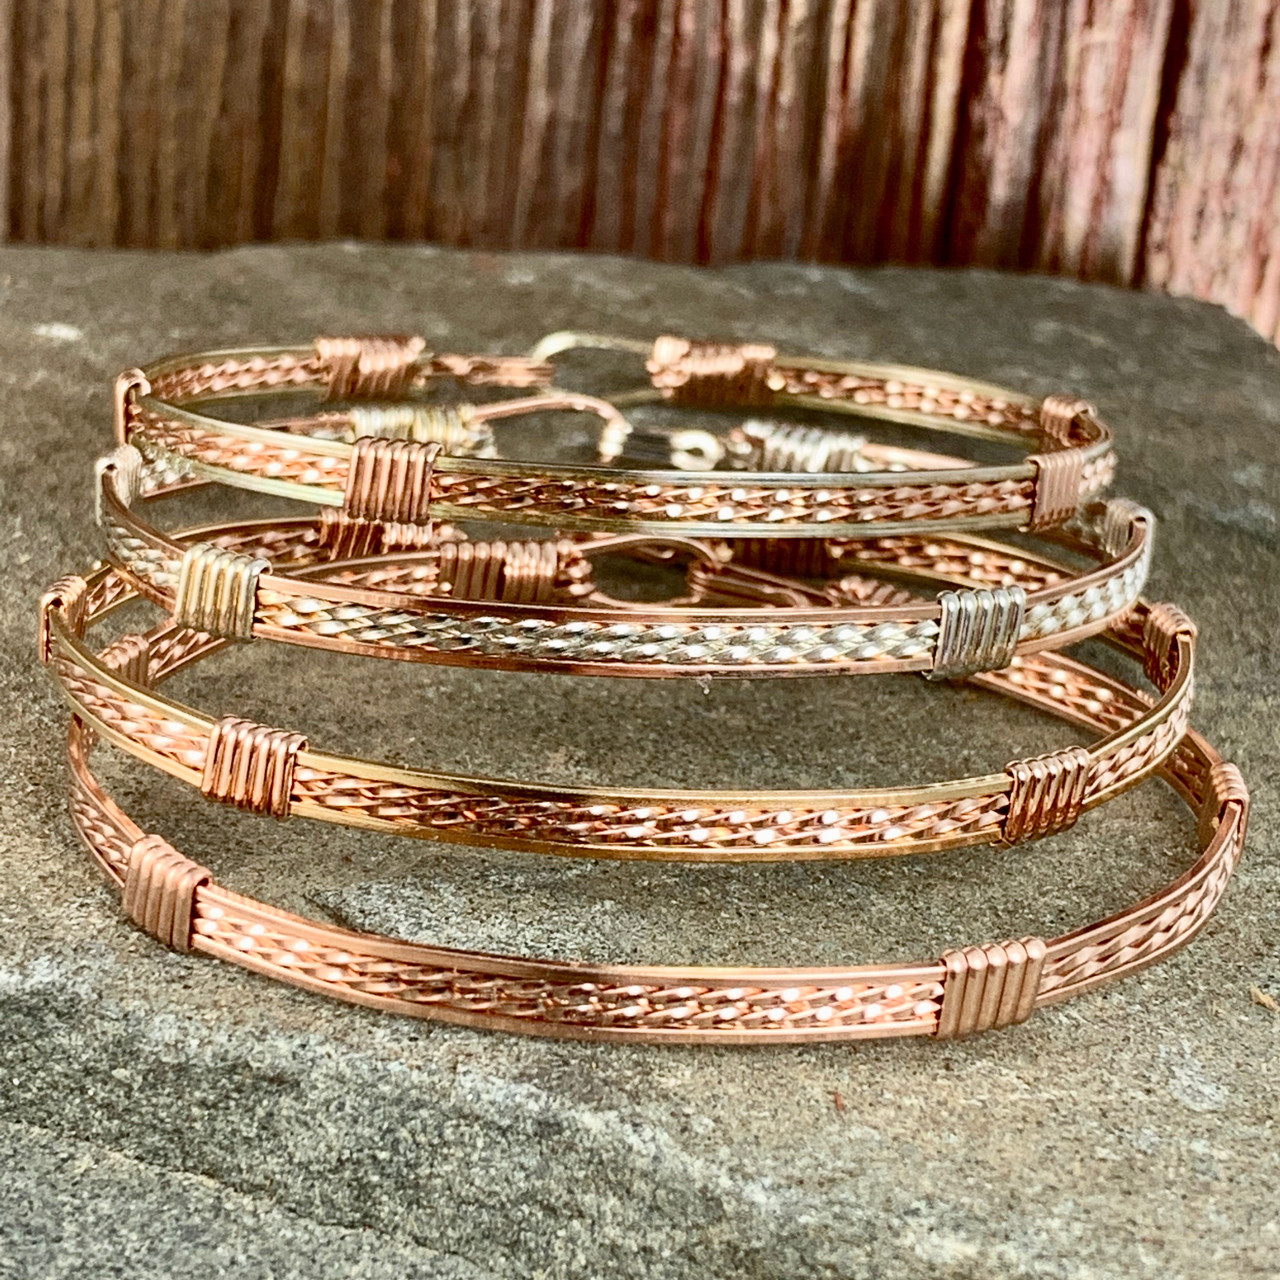 ALL METAL 8 Wire Bracelet - with Options